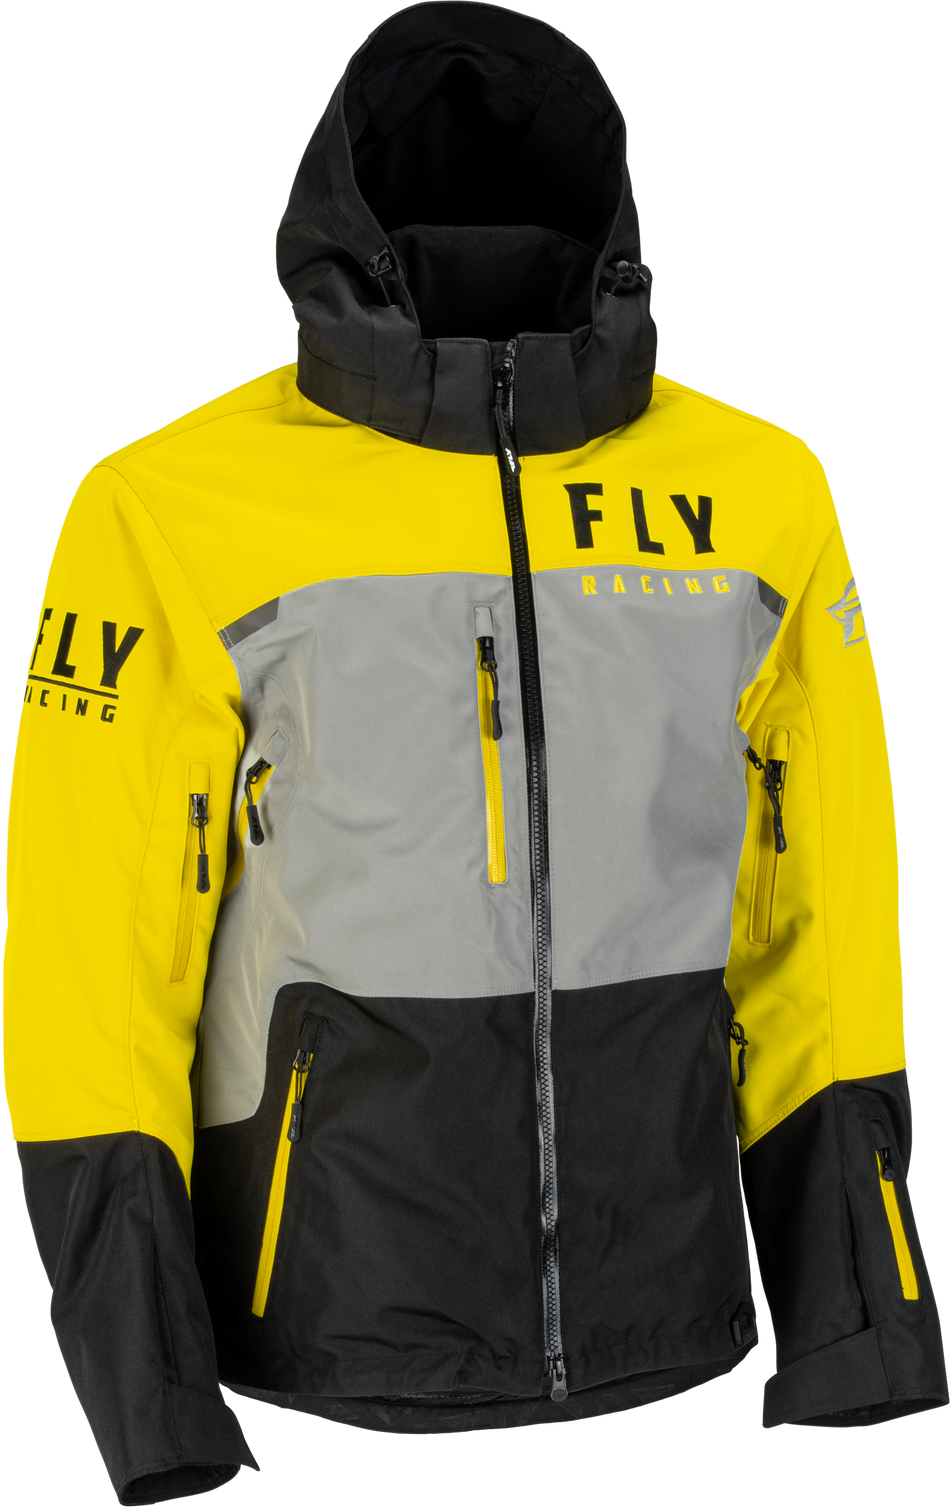 FLY RACING Carbon Jacket Yellow/Grey Sm 470-4136S